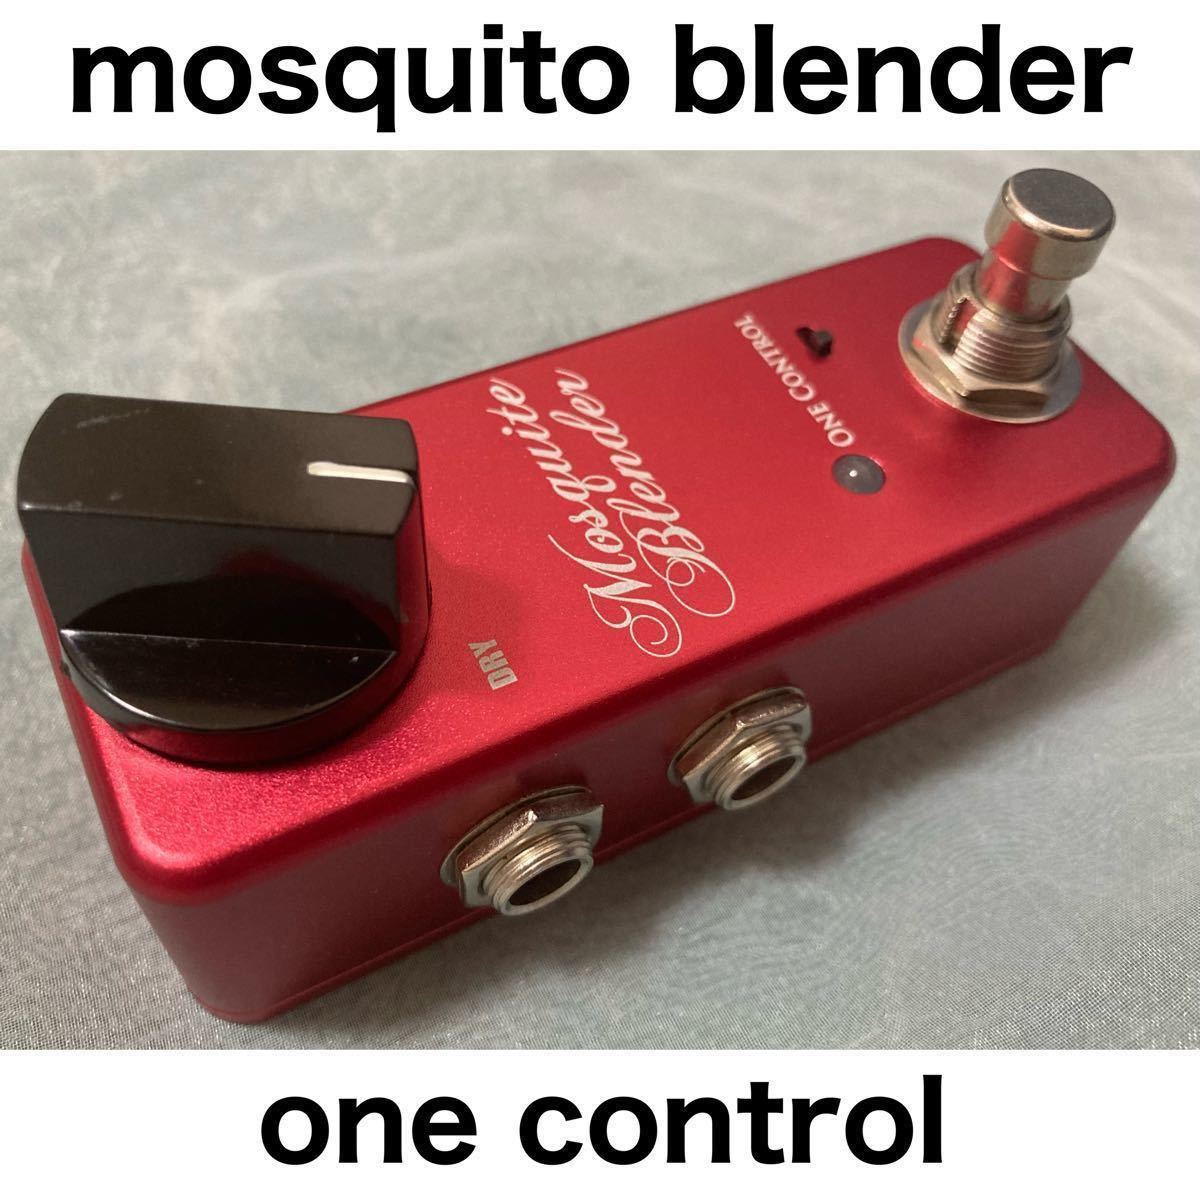 one control mosquito blender - 楽器、器材